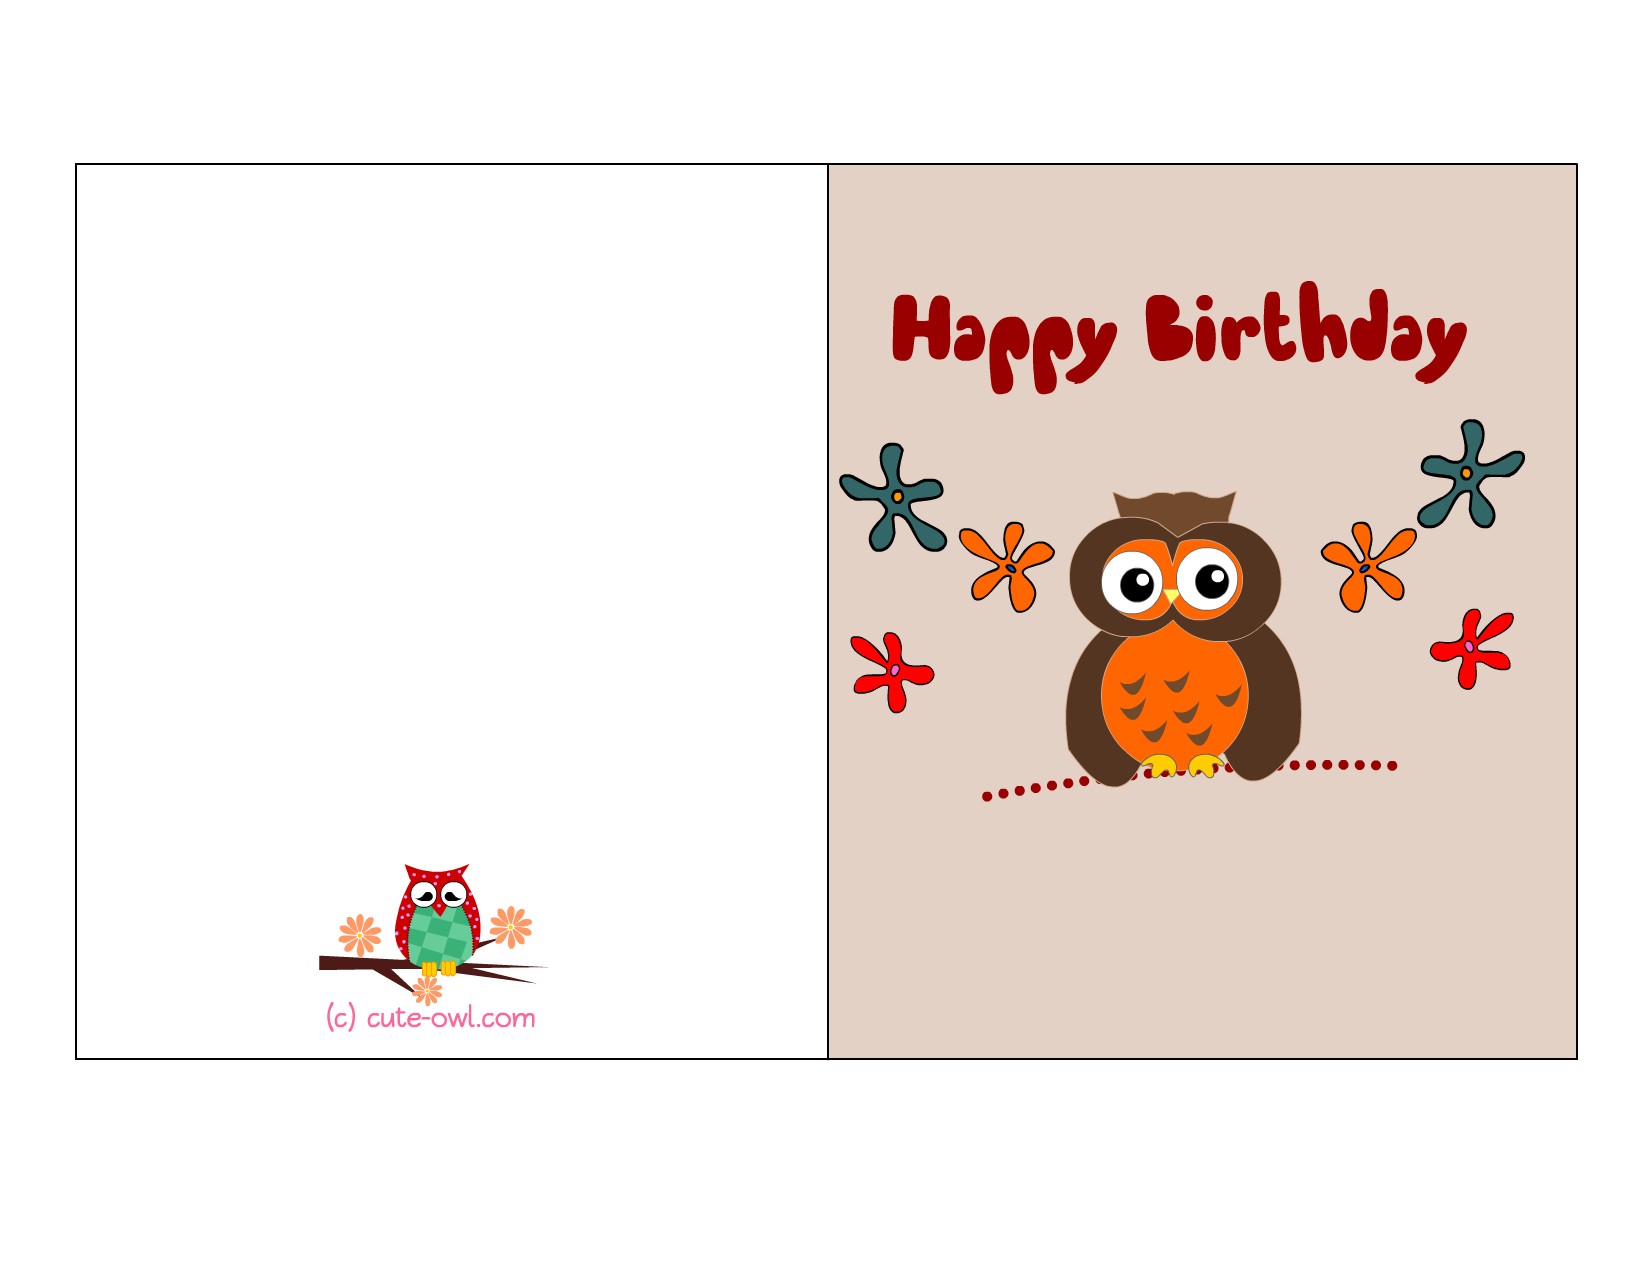 birthday-cards-delivered-same-day-greeting-cards-gifts-liverpool